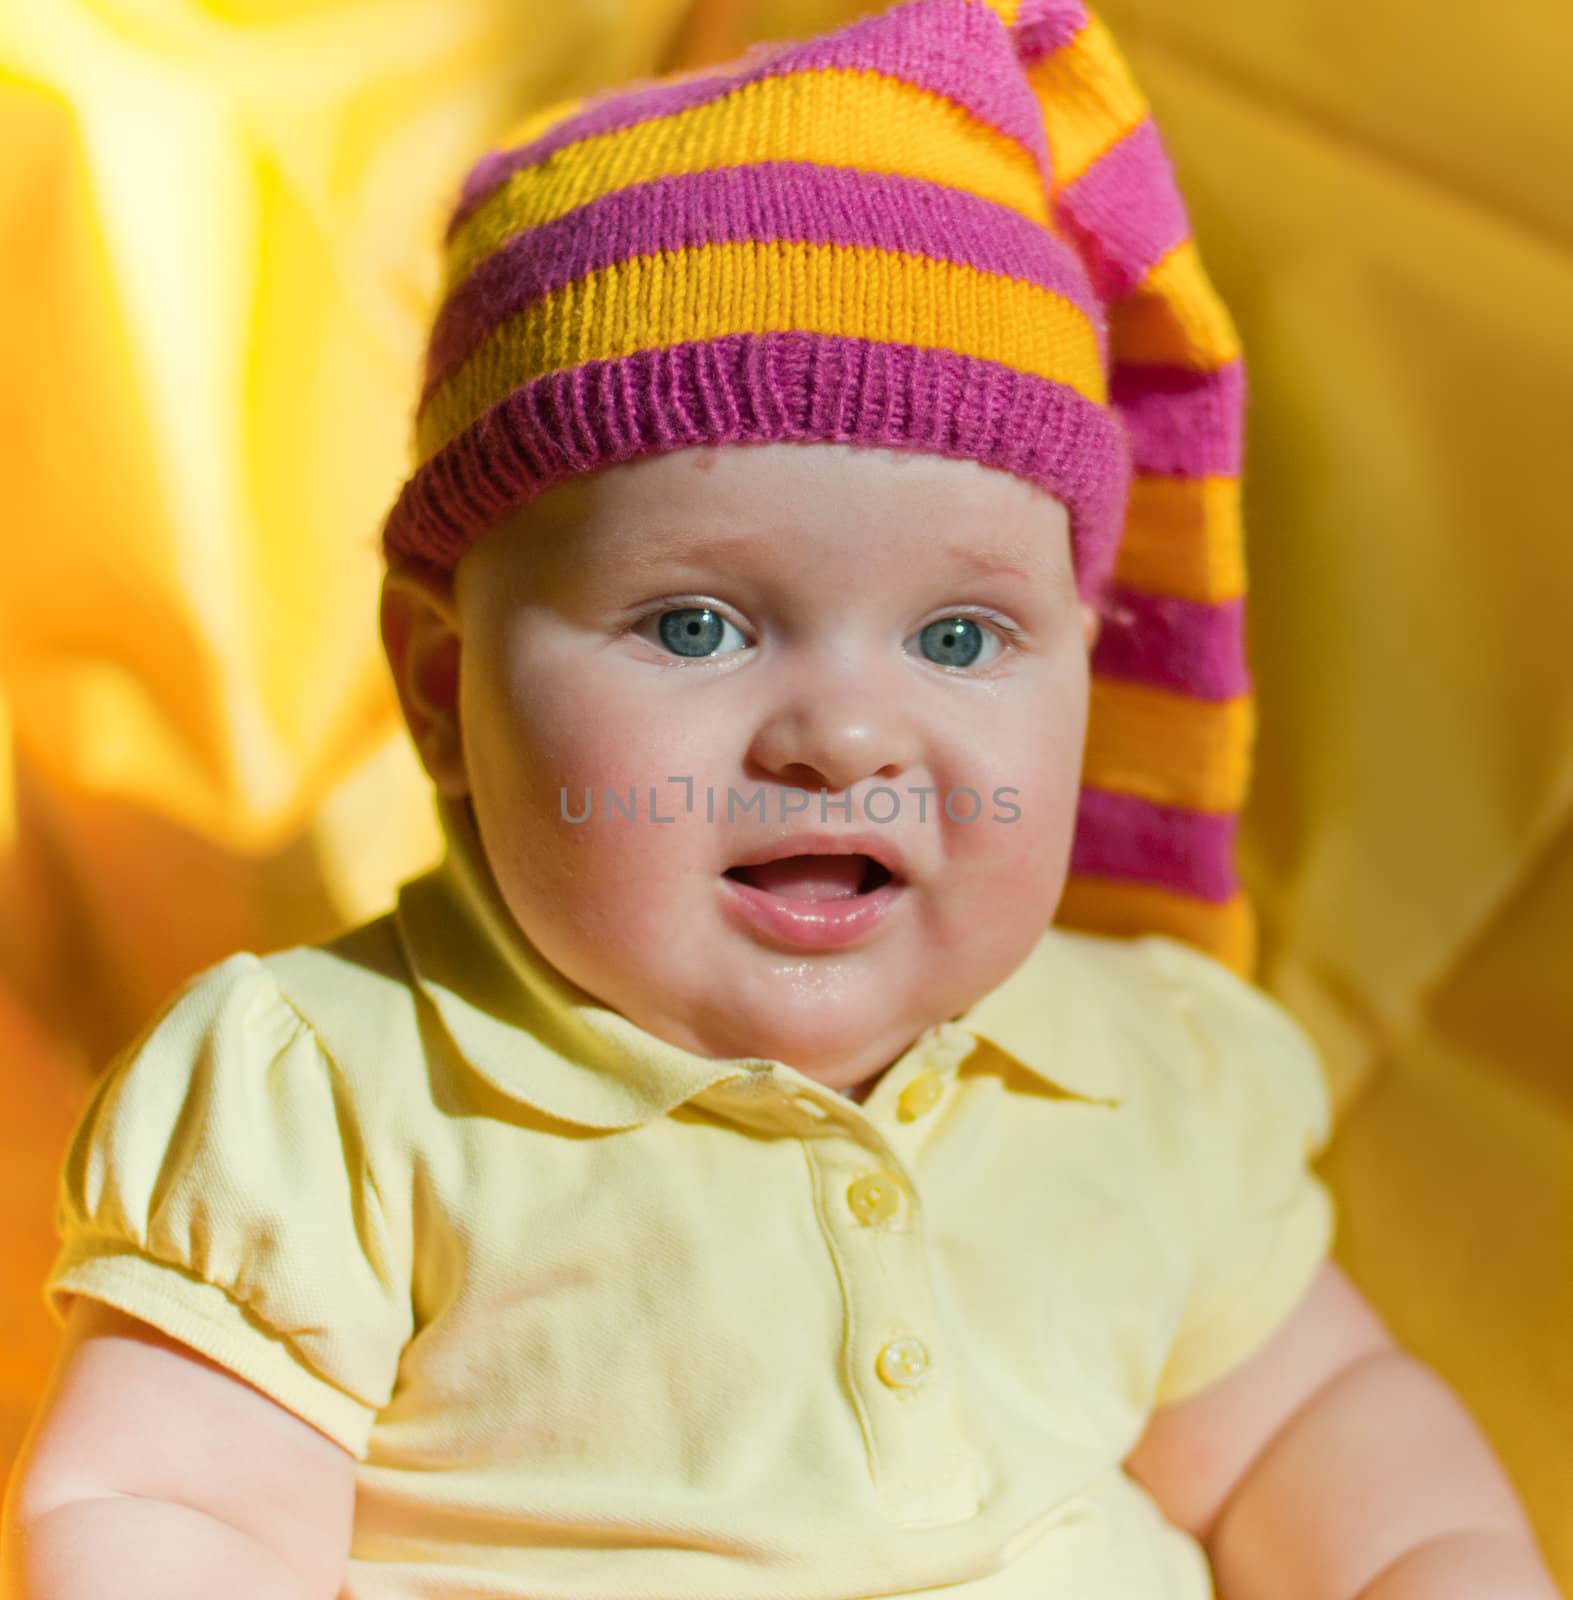 Surprised baby in the yellow and pink hat